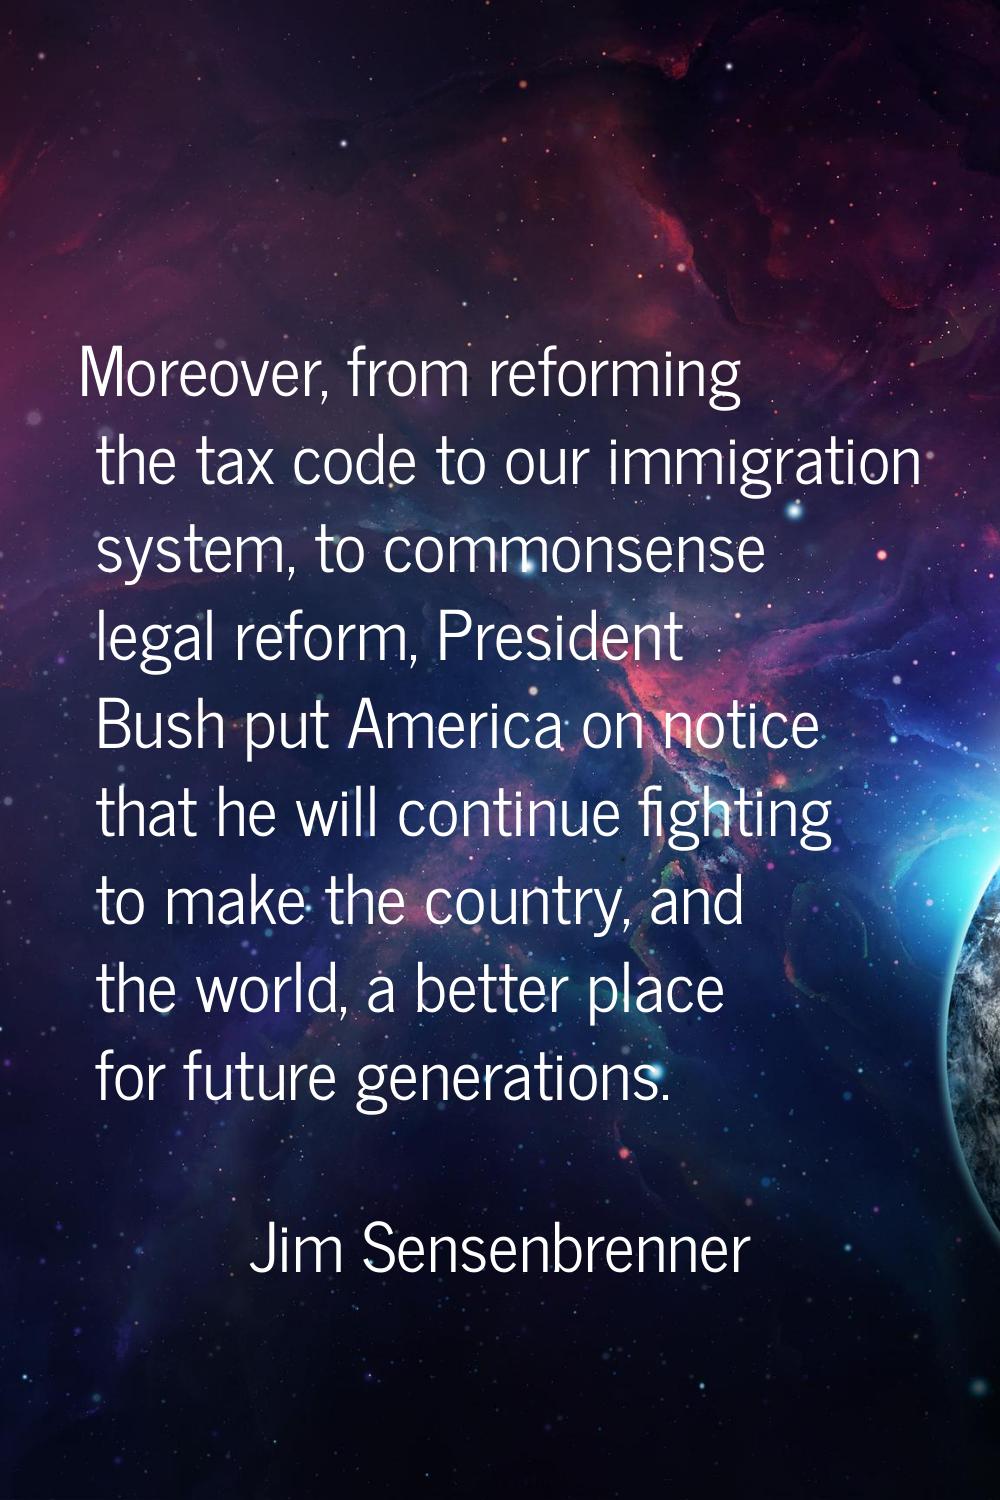 Moreover, from reforming the tax code to our immigration system, to commonsense legal reform, Presi